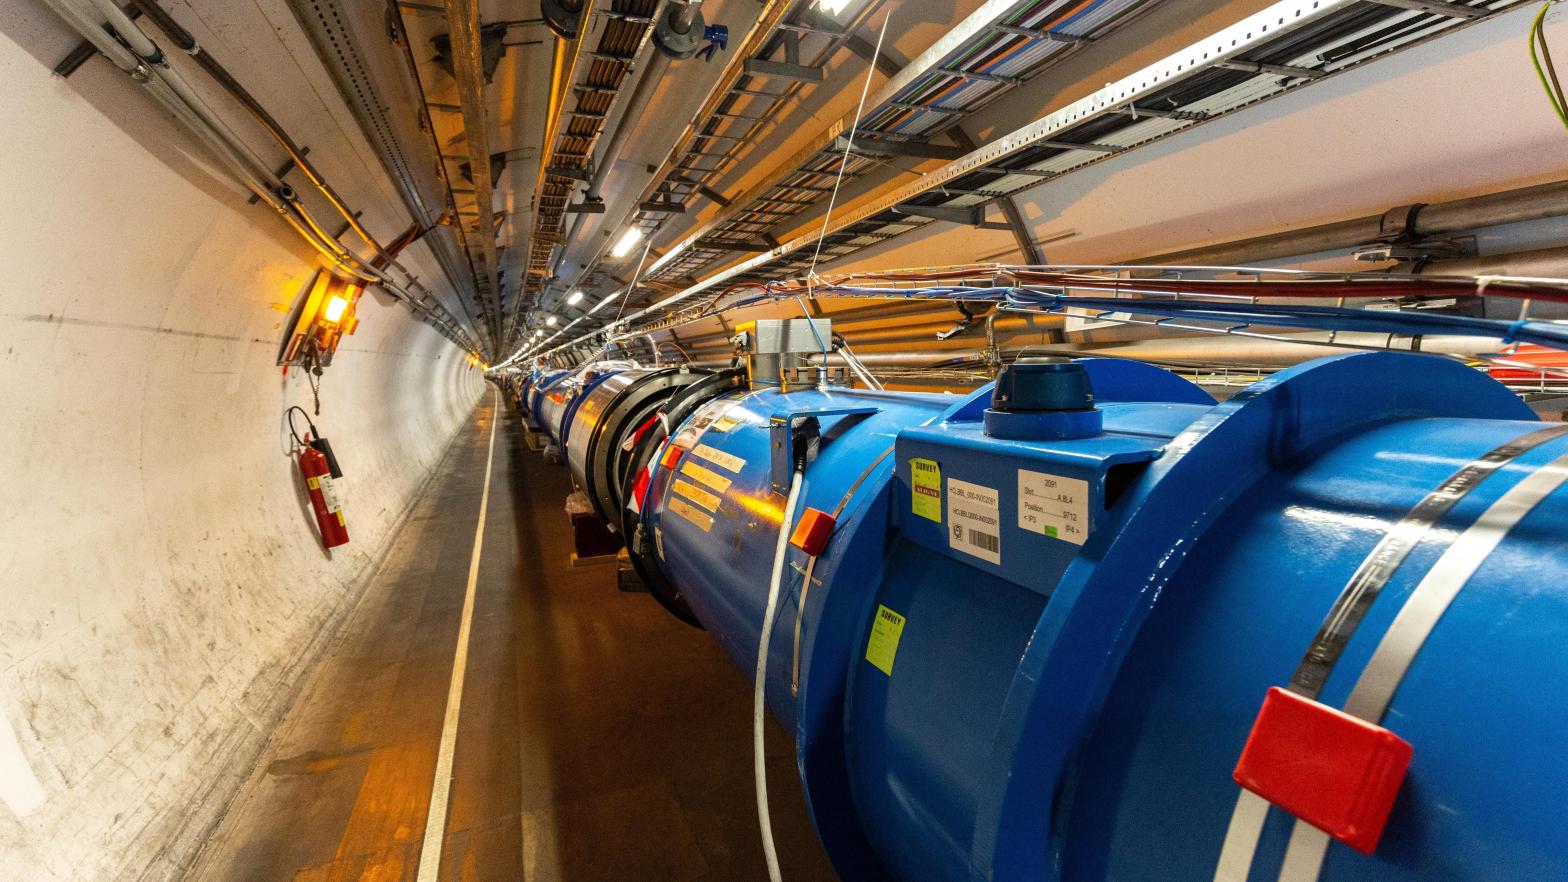 A segment of the LHC in 2019. (Photo: Ronald Patrick, Getty Images)